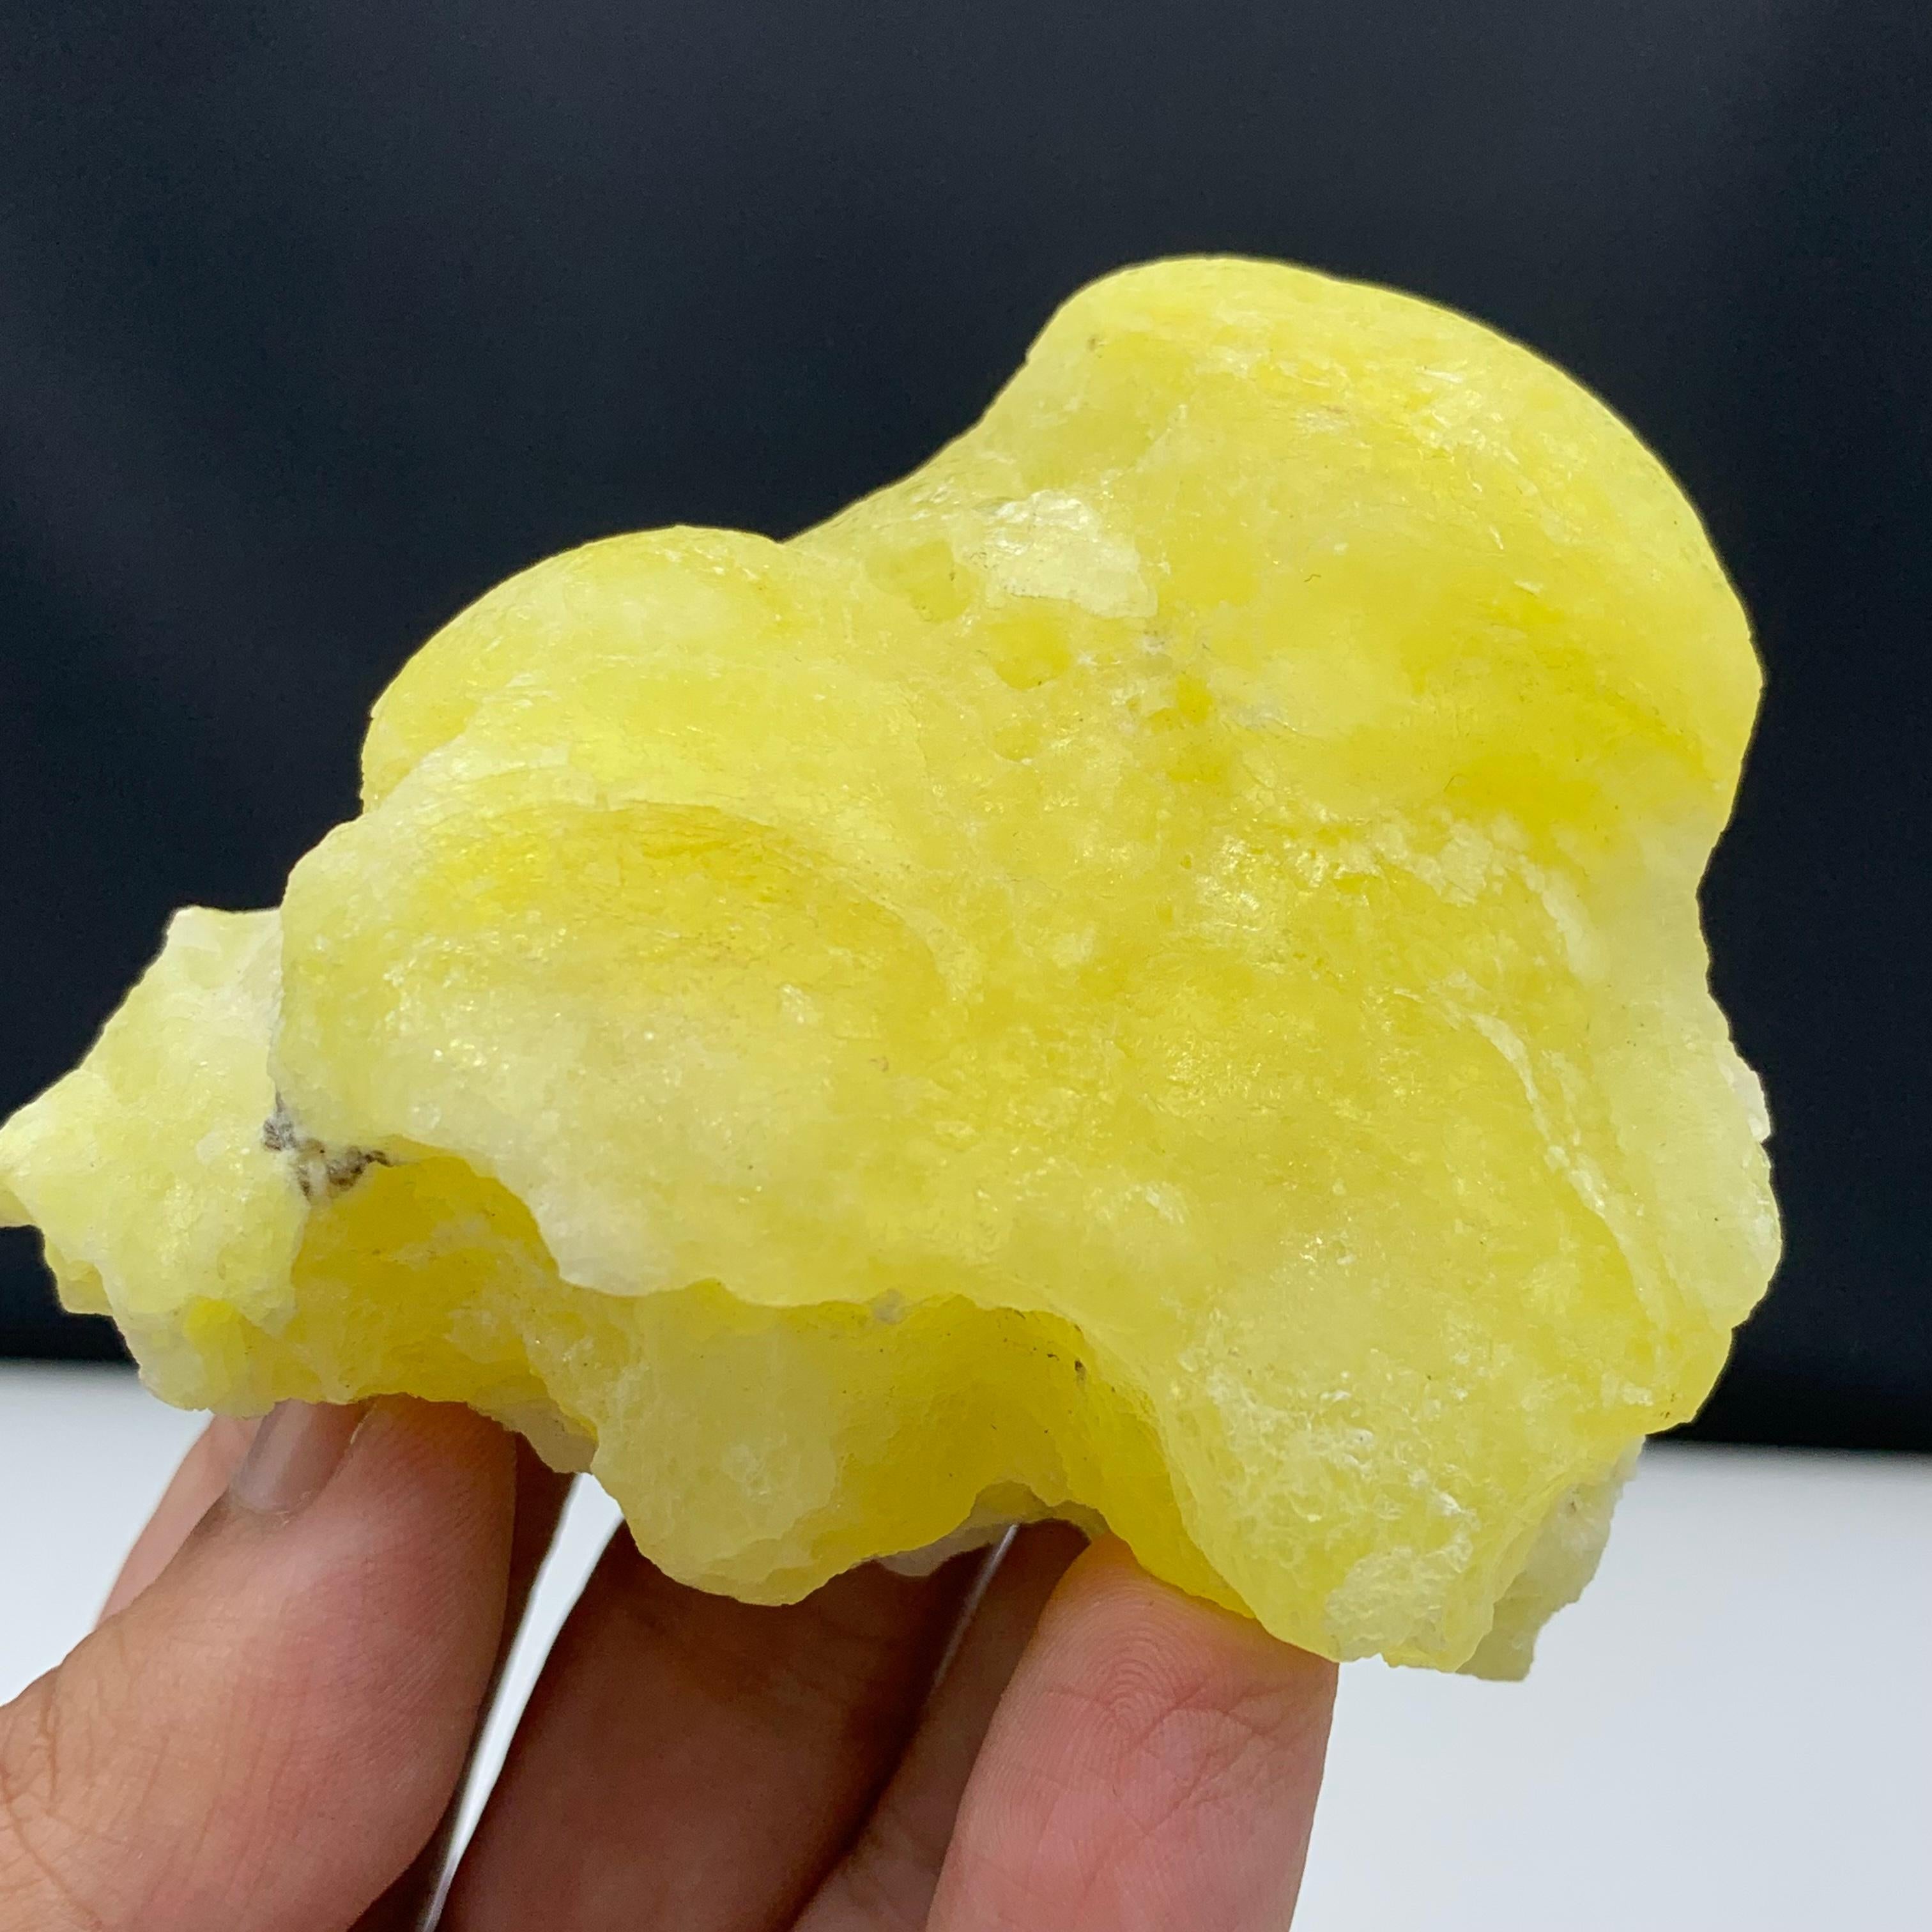 Rock Crystal 173 Gram Adorable Lemon Yellow Brucite In Botryoidal Rounded Habit From Pakistan For Sale